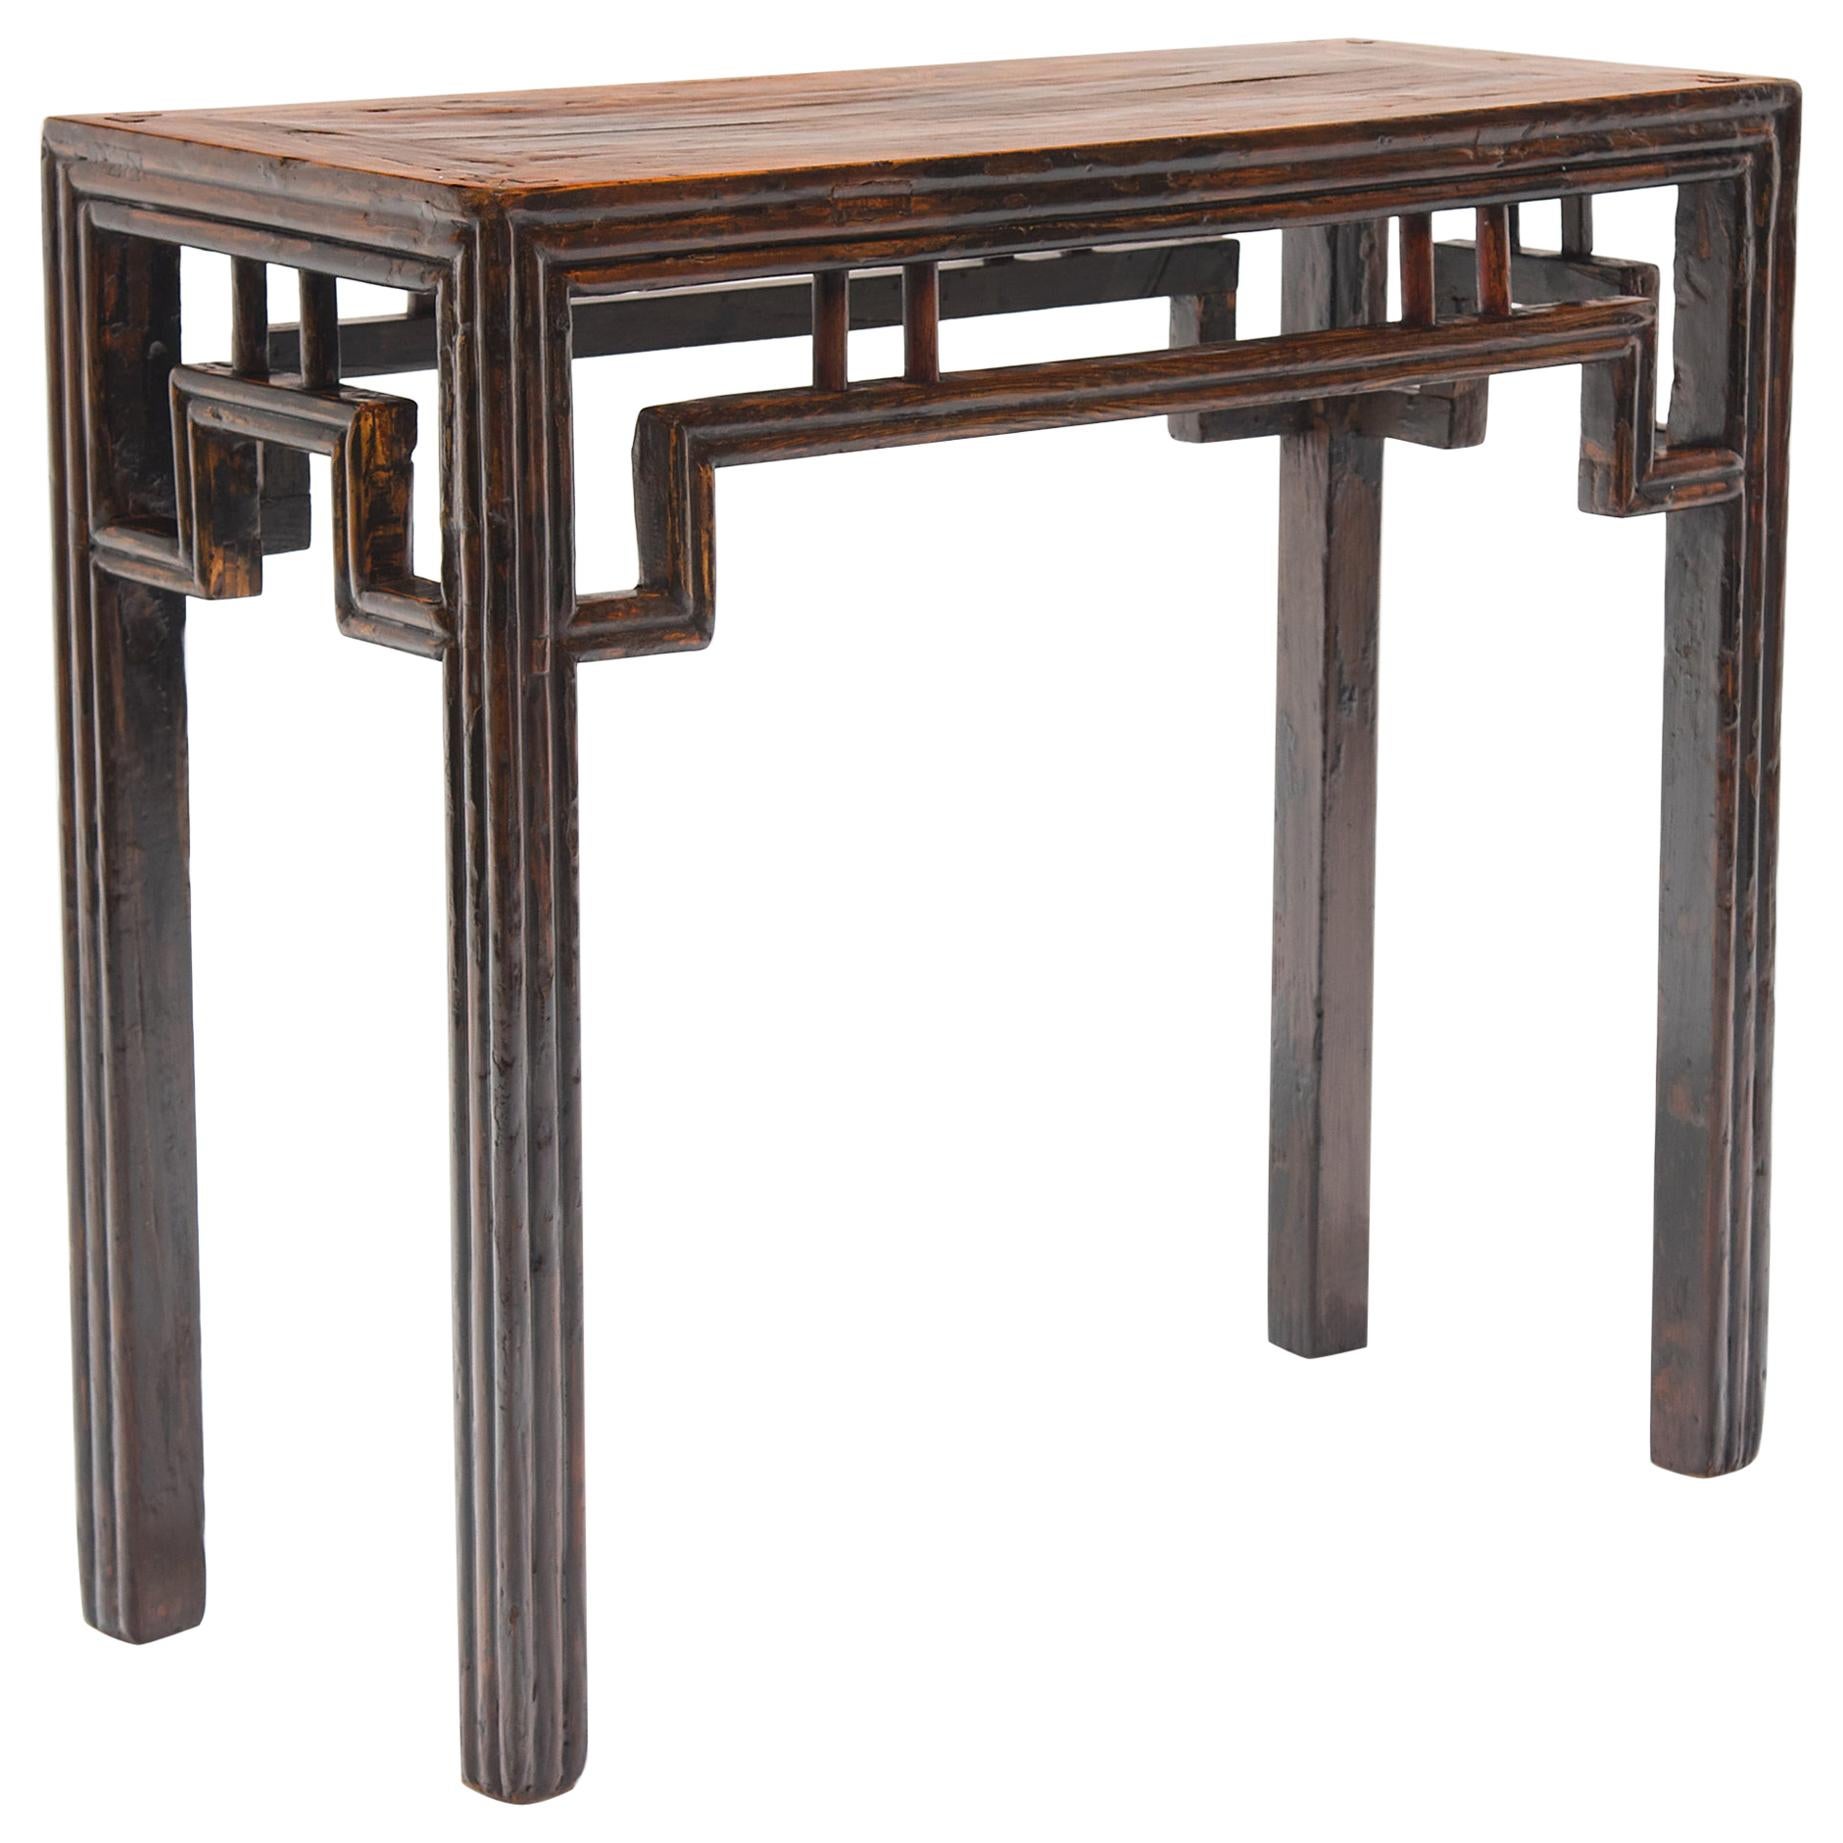 Chinese Lattice Wine Table, c. 1850 For Sale